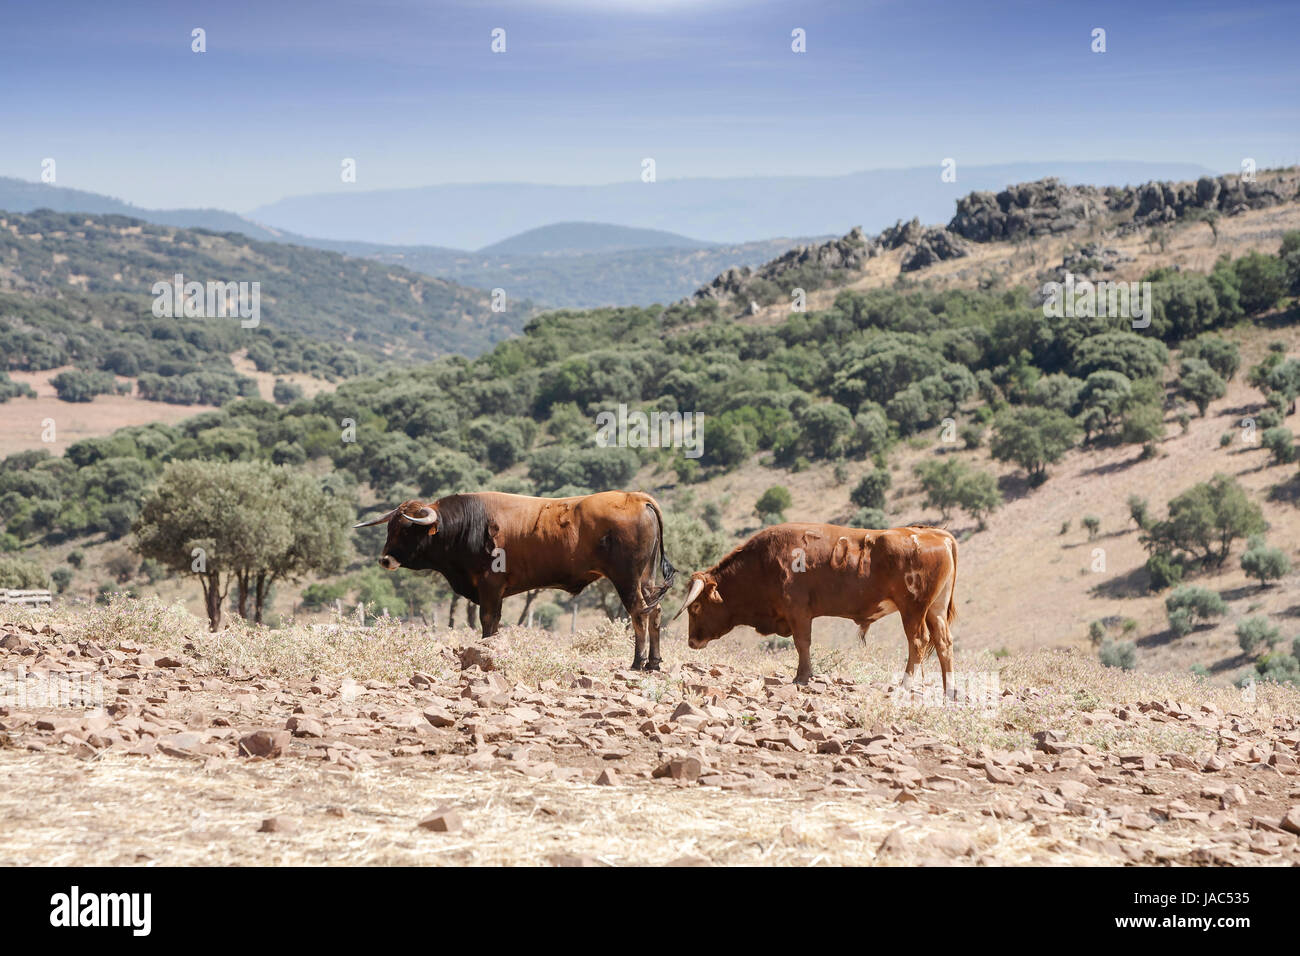 Bulls in countryside, Andalusia, Spain Stock Photo